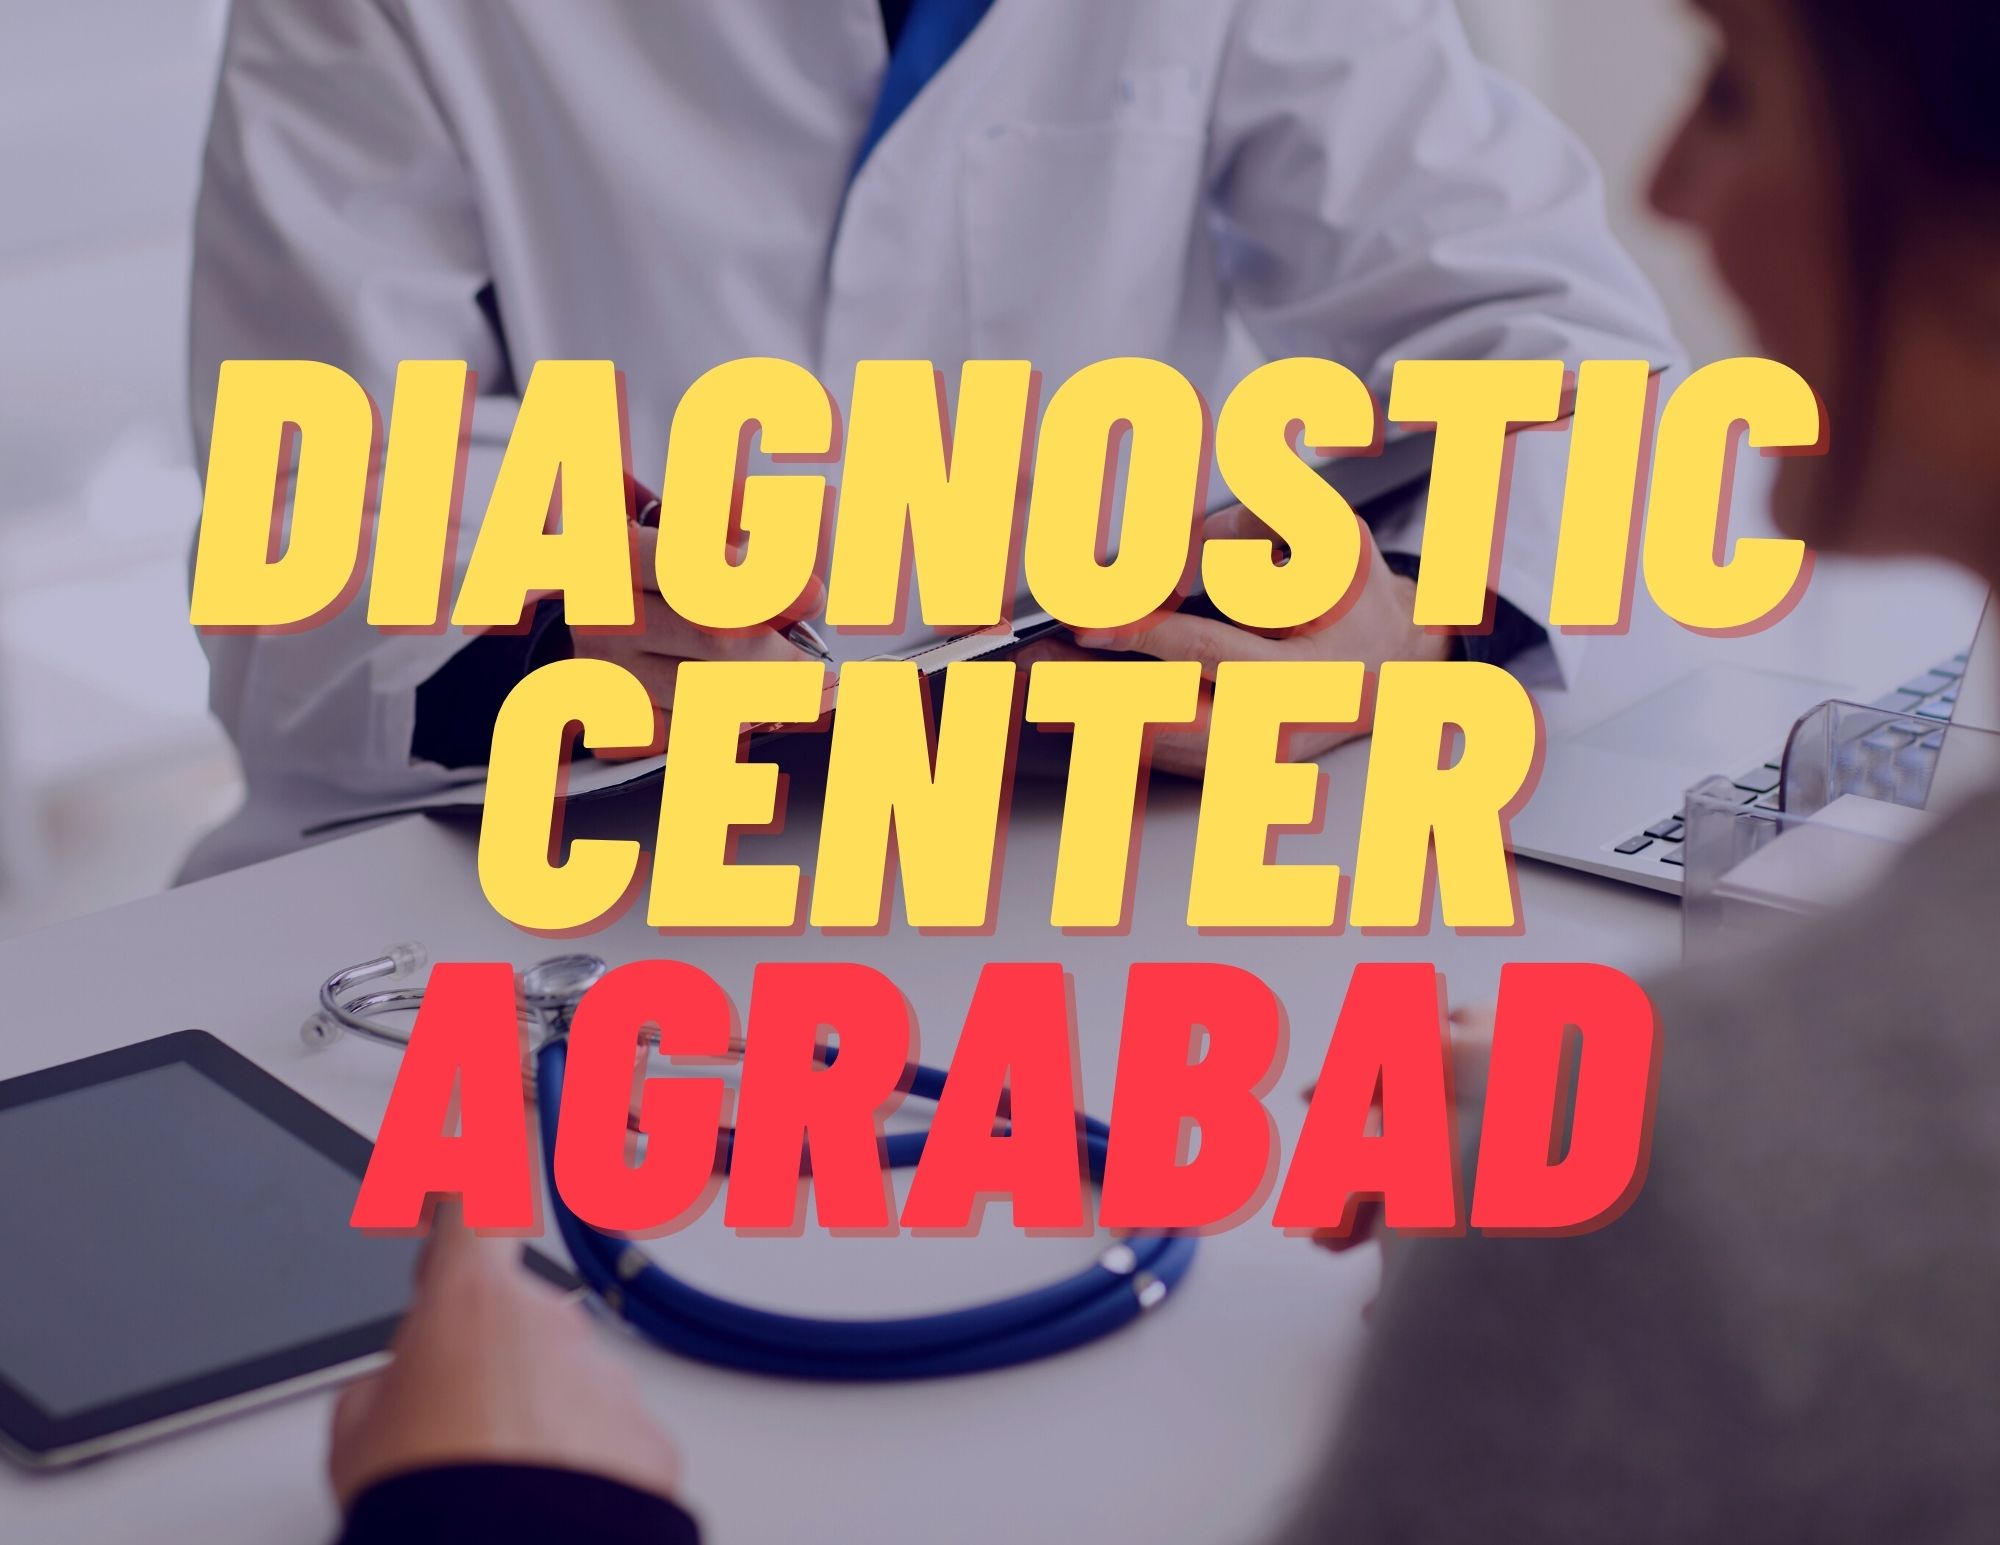 Best diagnostic center in the Agrabad area